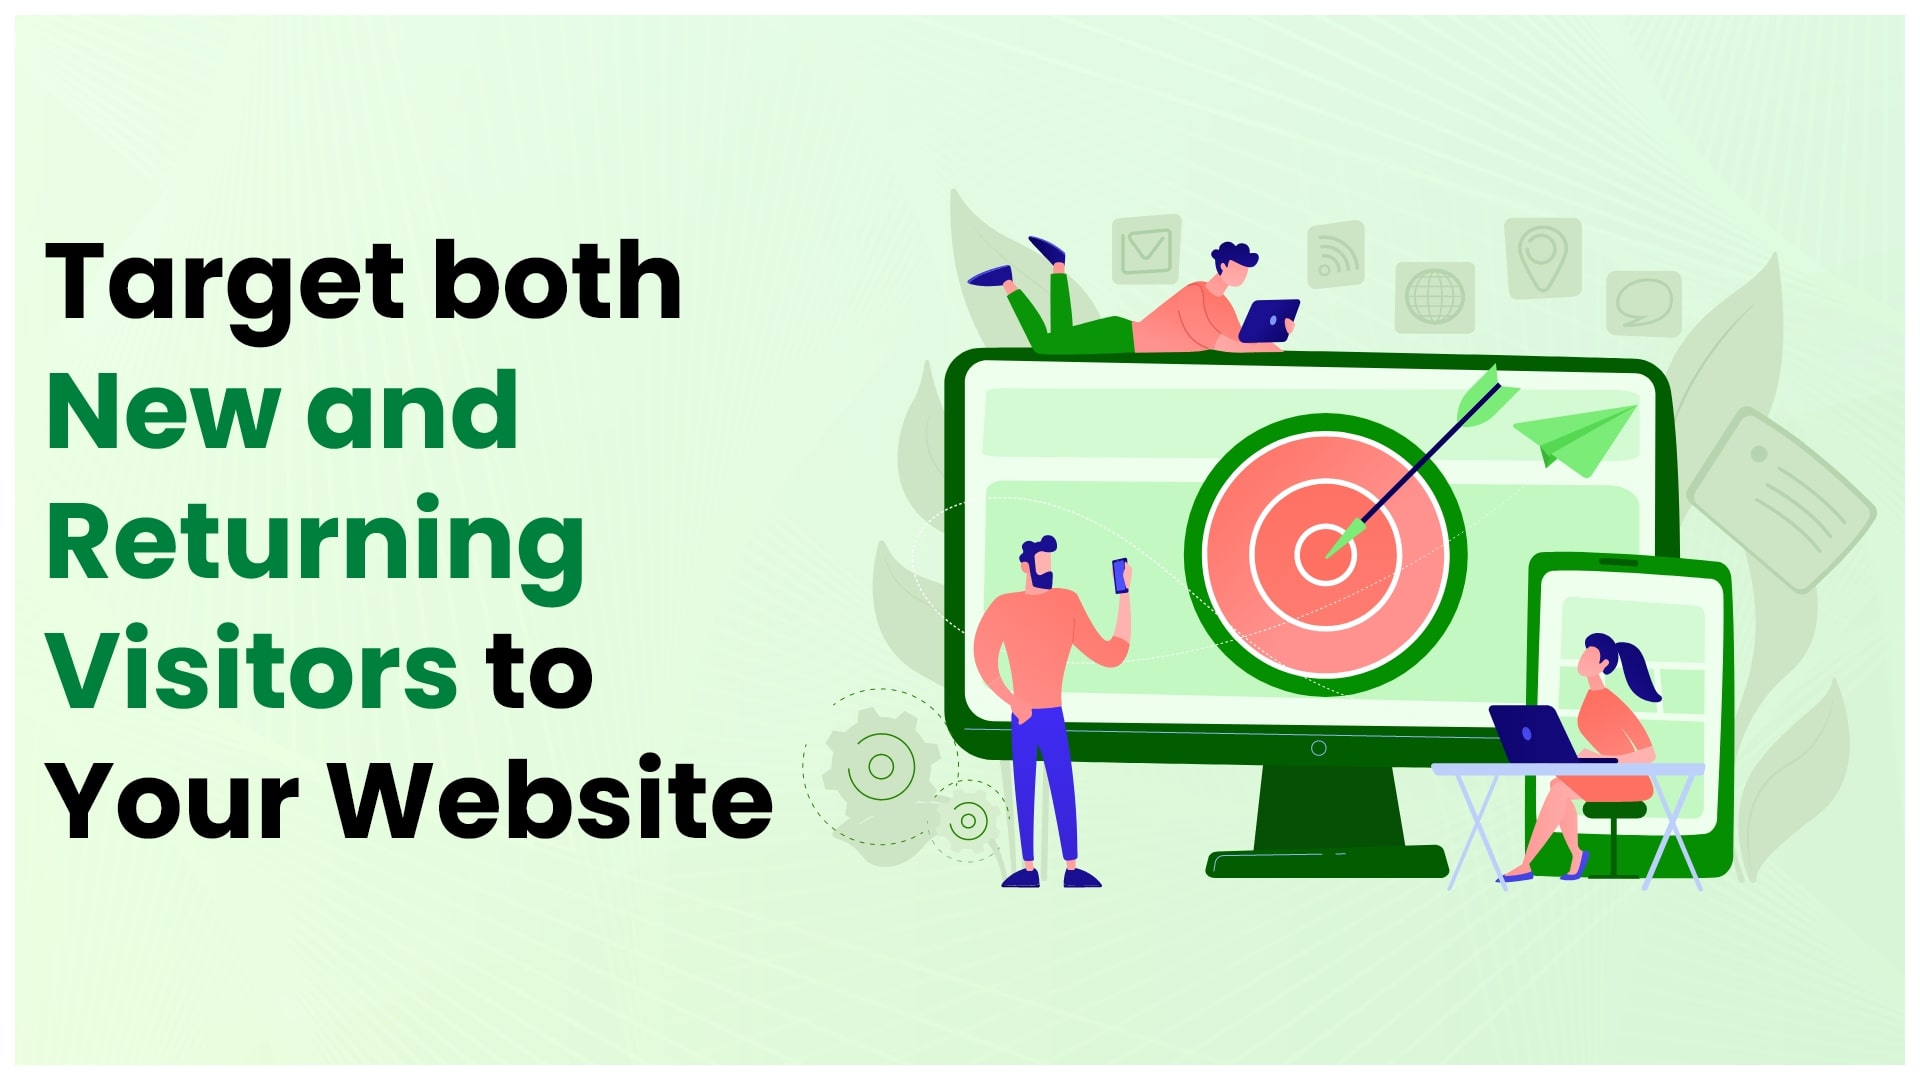 Target both New and Returning Visitors to Your Website